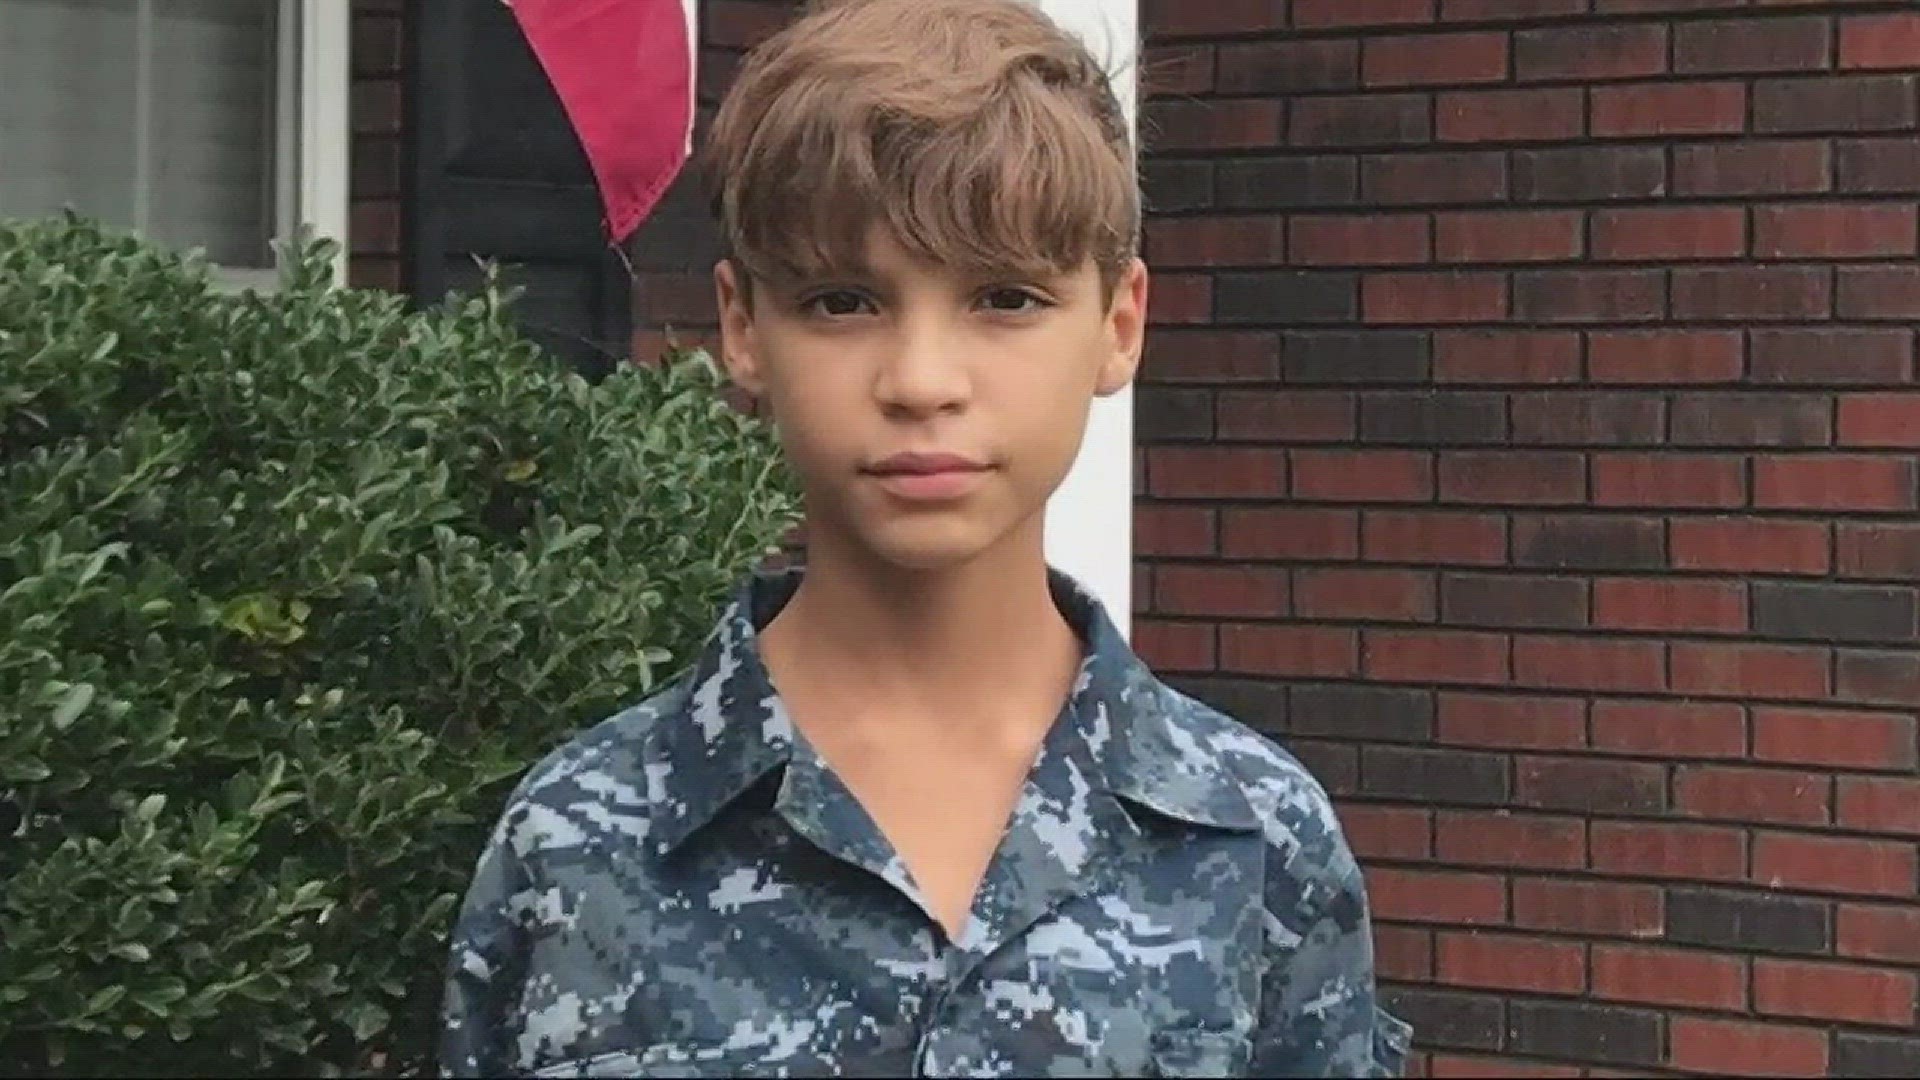 A Gaston County boy says he was bullied for wearing his brother's Navy uniform to school.